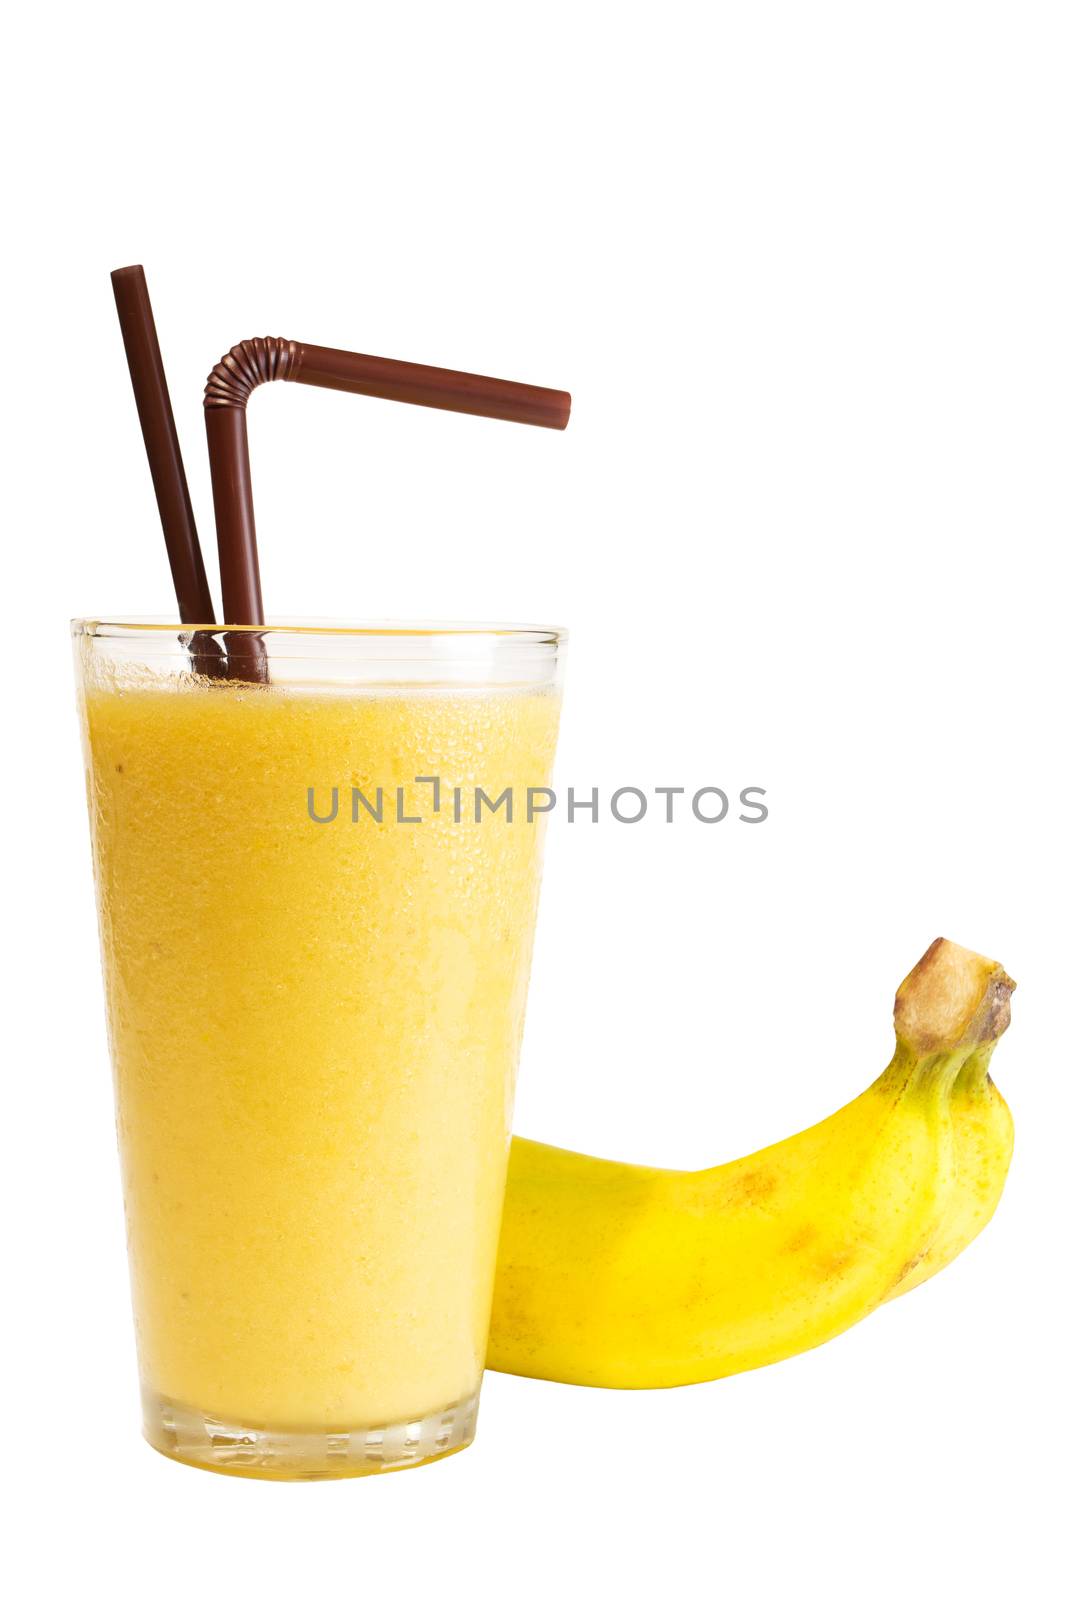 Banana smoothie in glass by wyoosumran